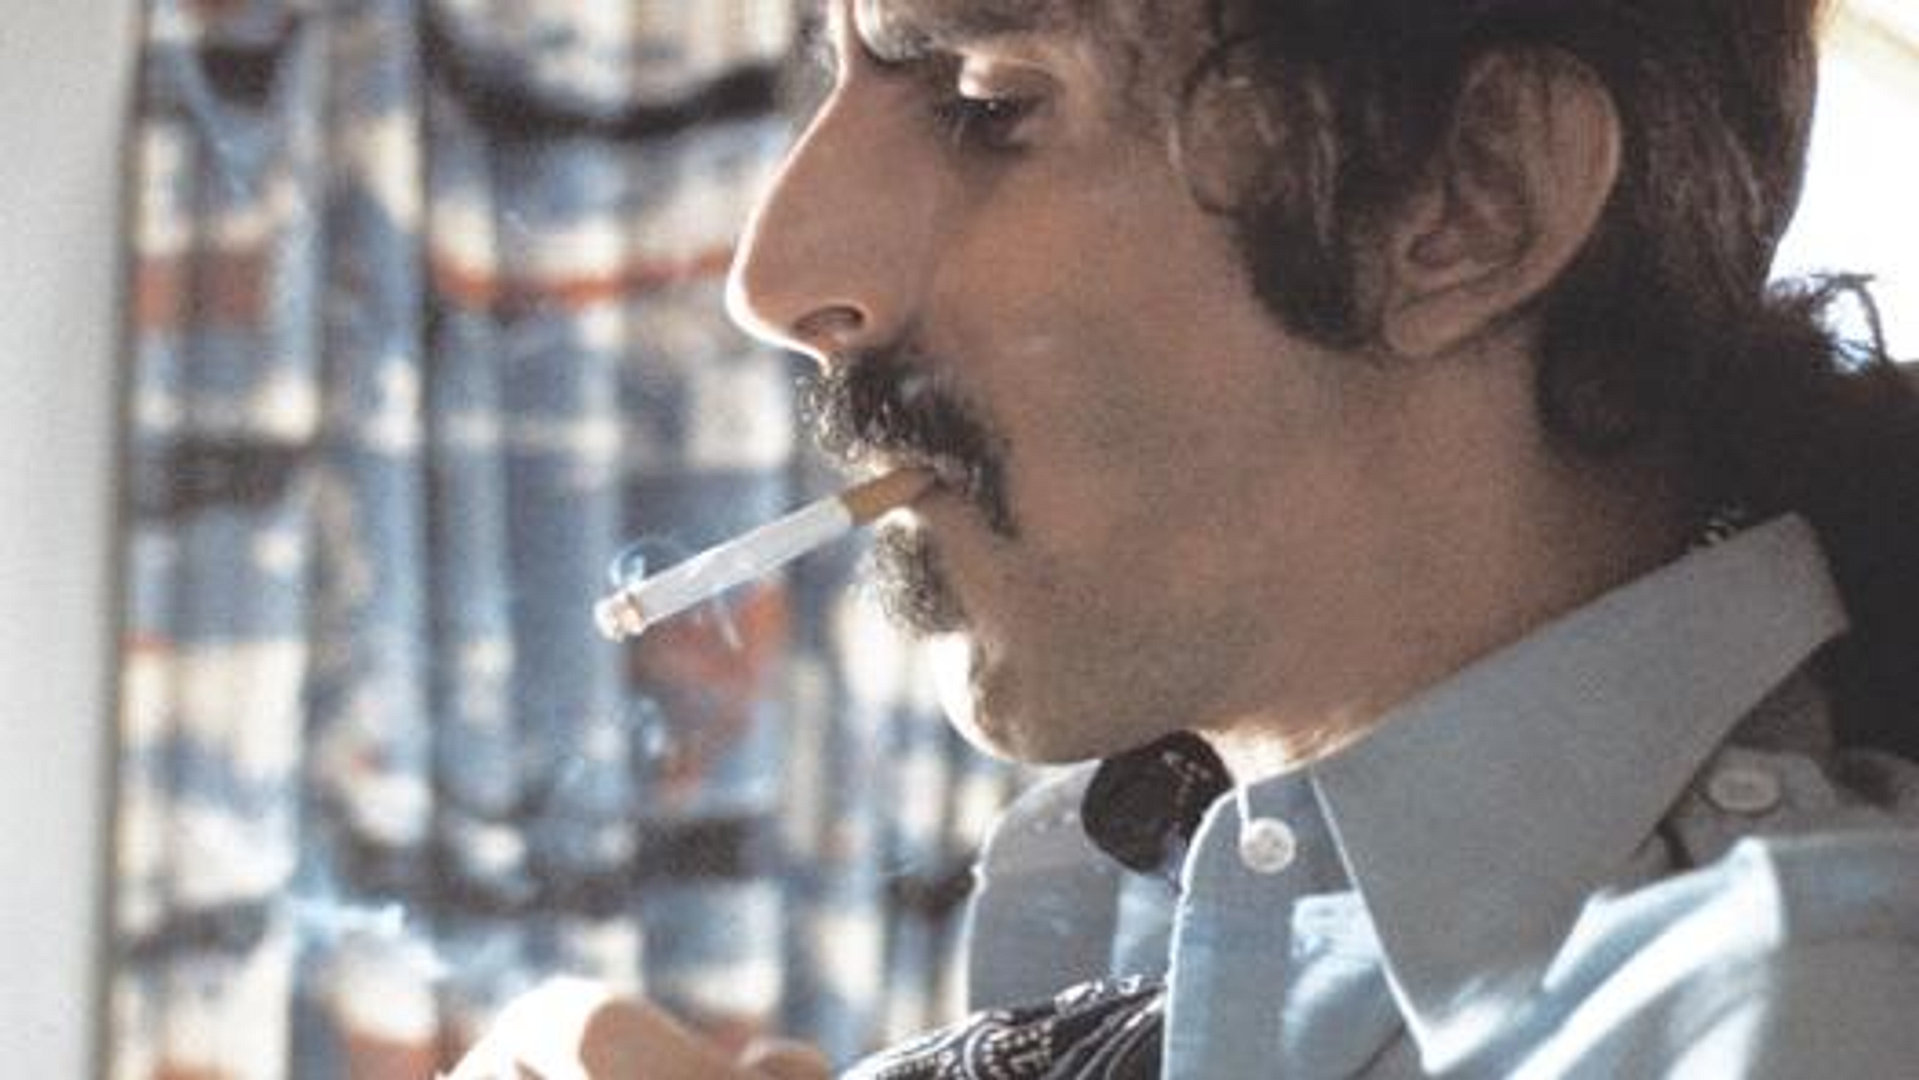 Eat that question - Frank Zappa in his own words